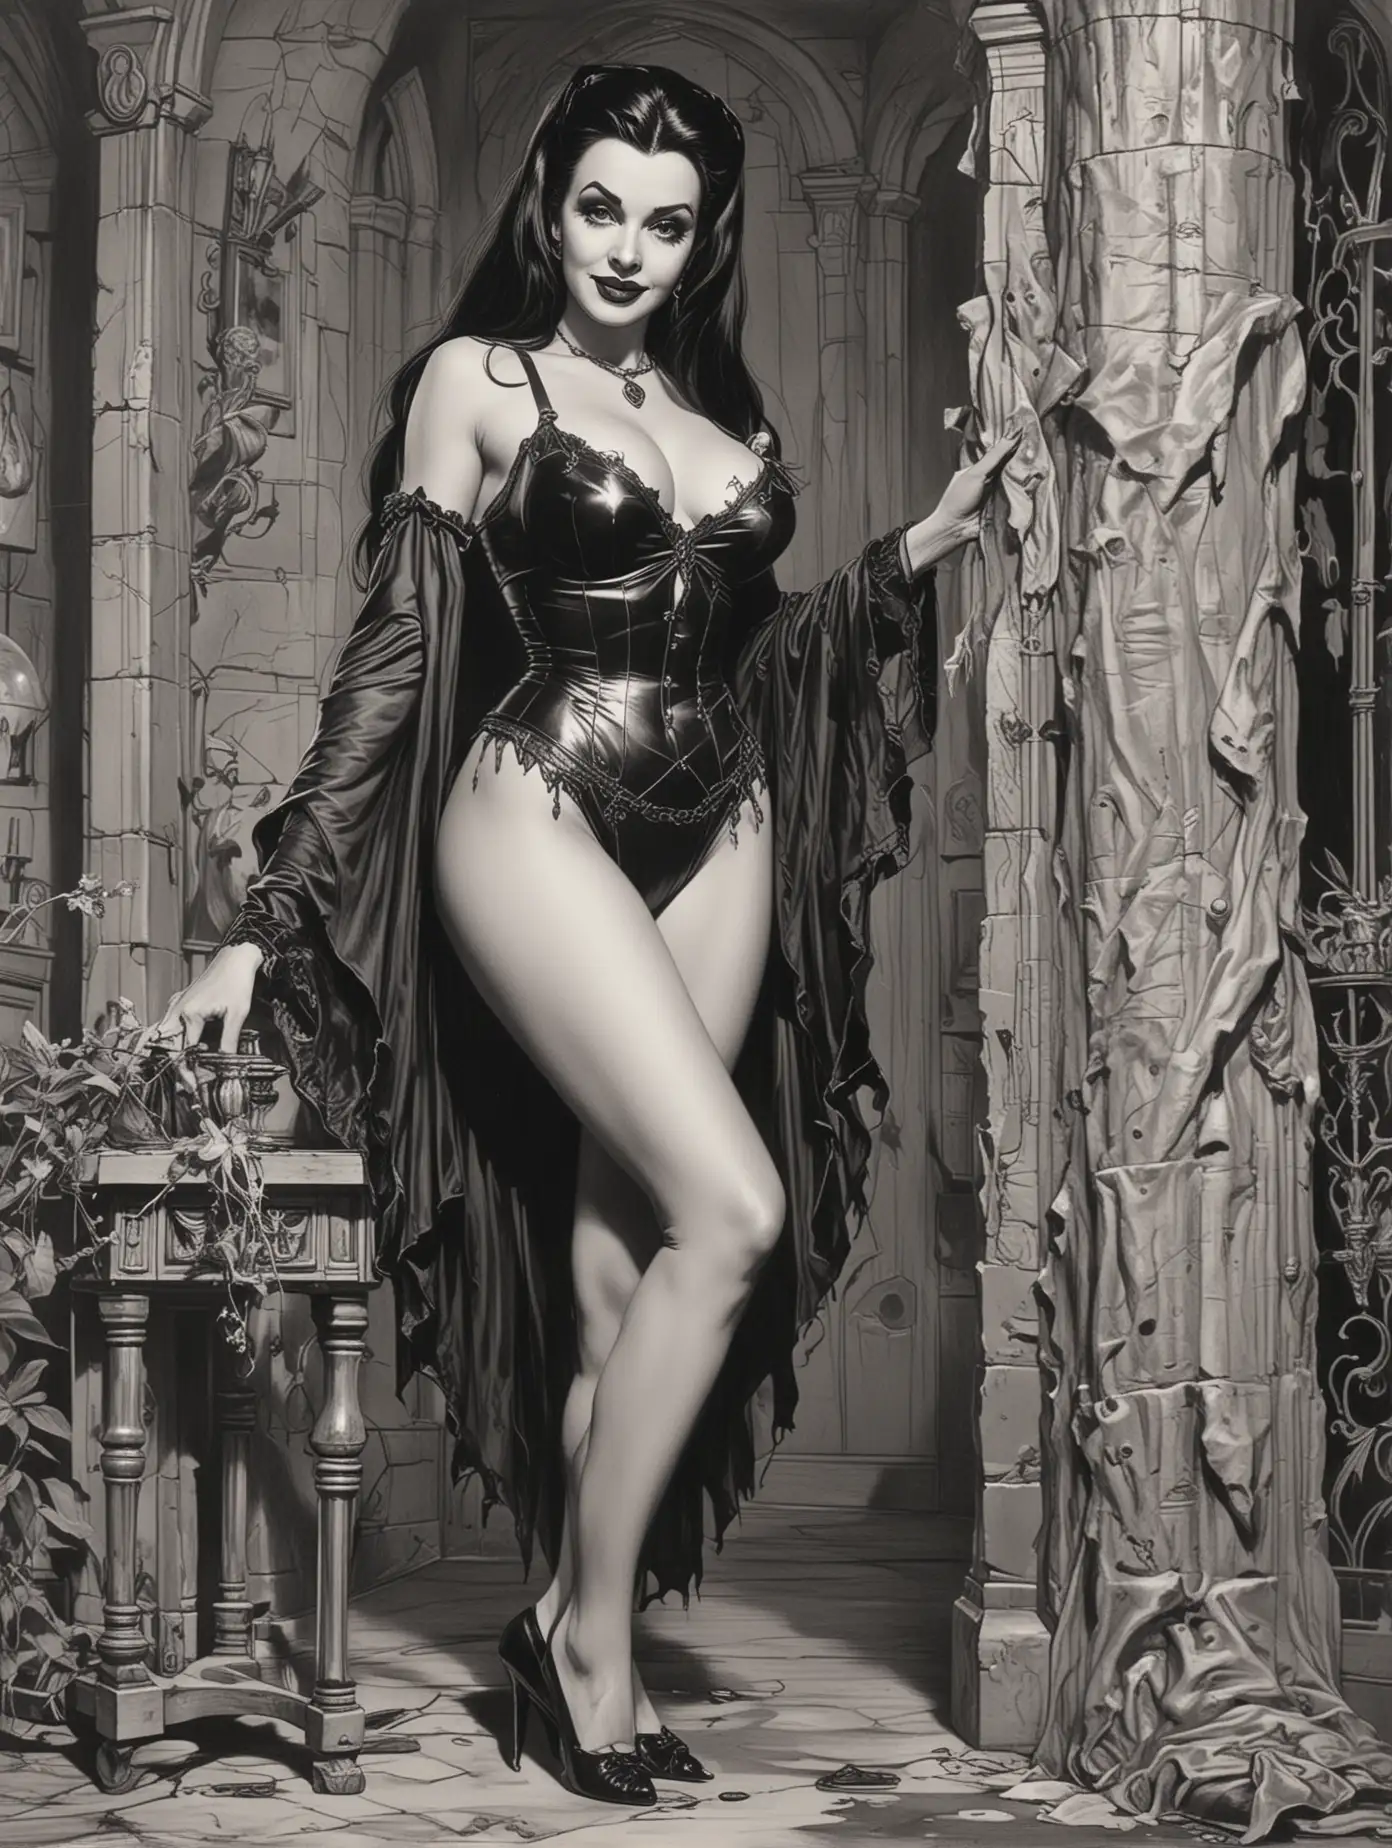 Lily Munster Portrayed in Neal Adams Style with Emphasis on Legs